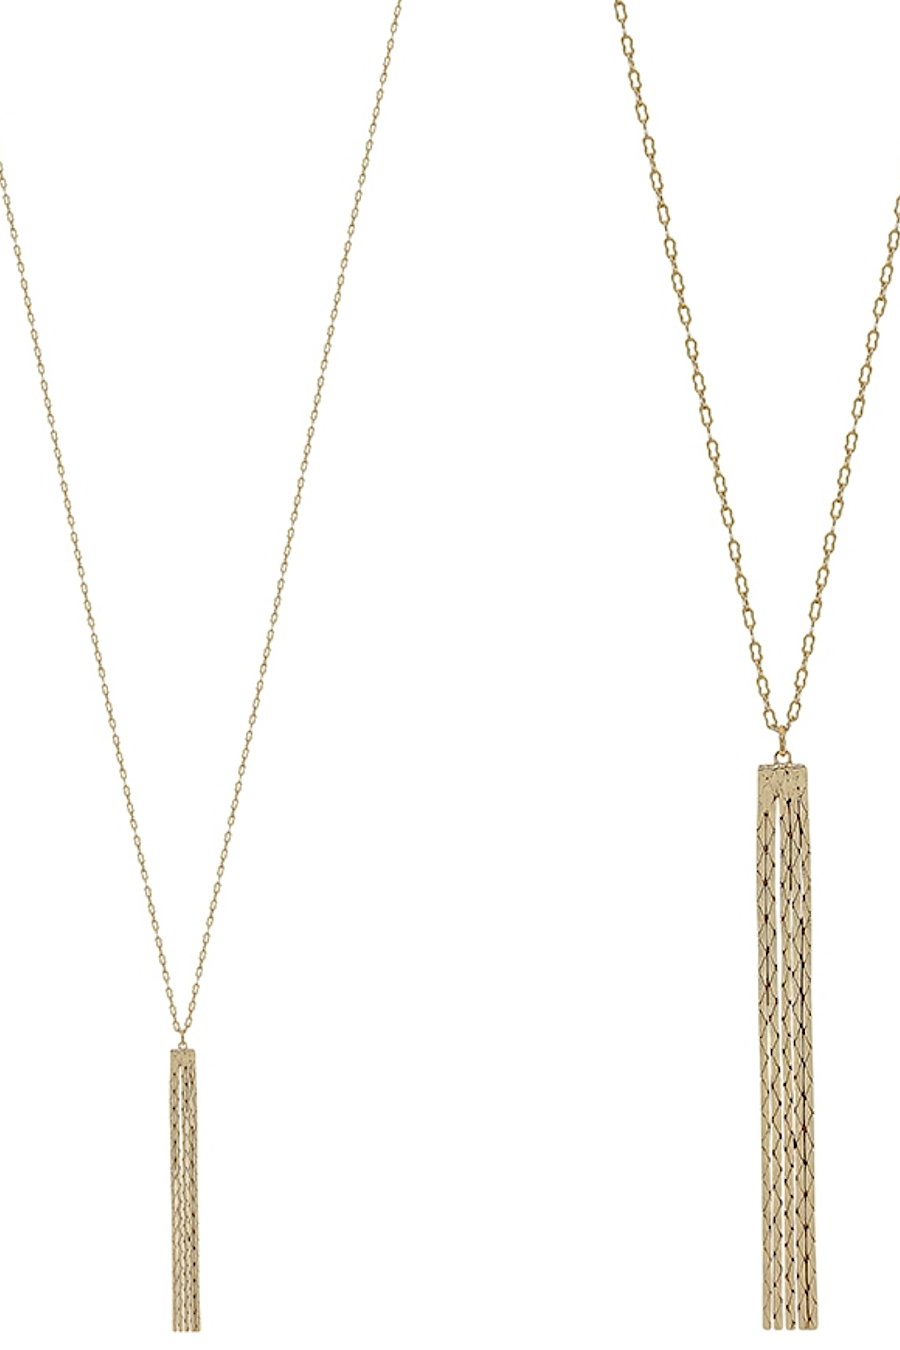 Long 32” Tassel Necklace in Gold or Silver